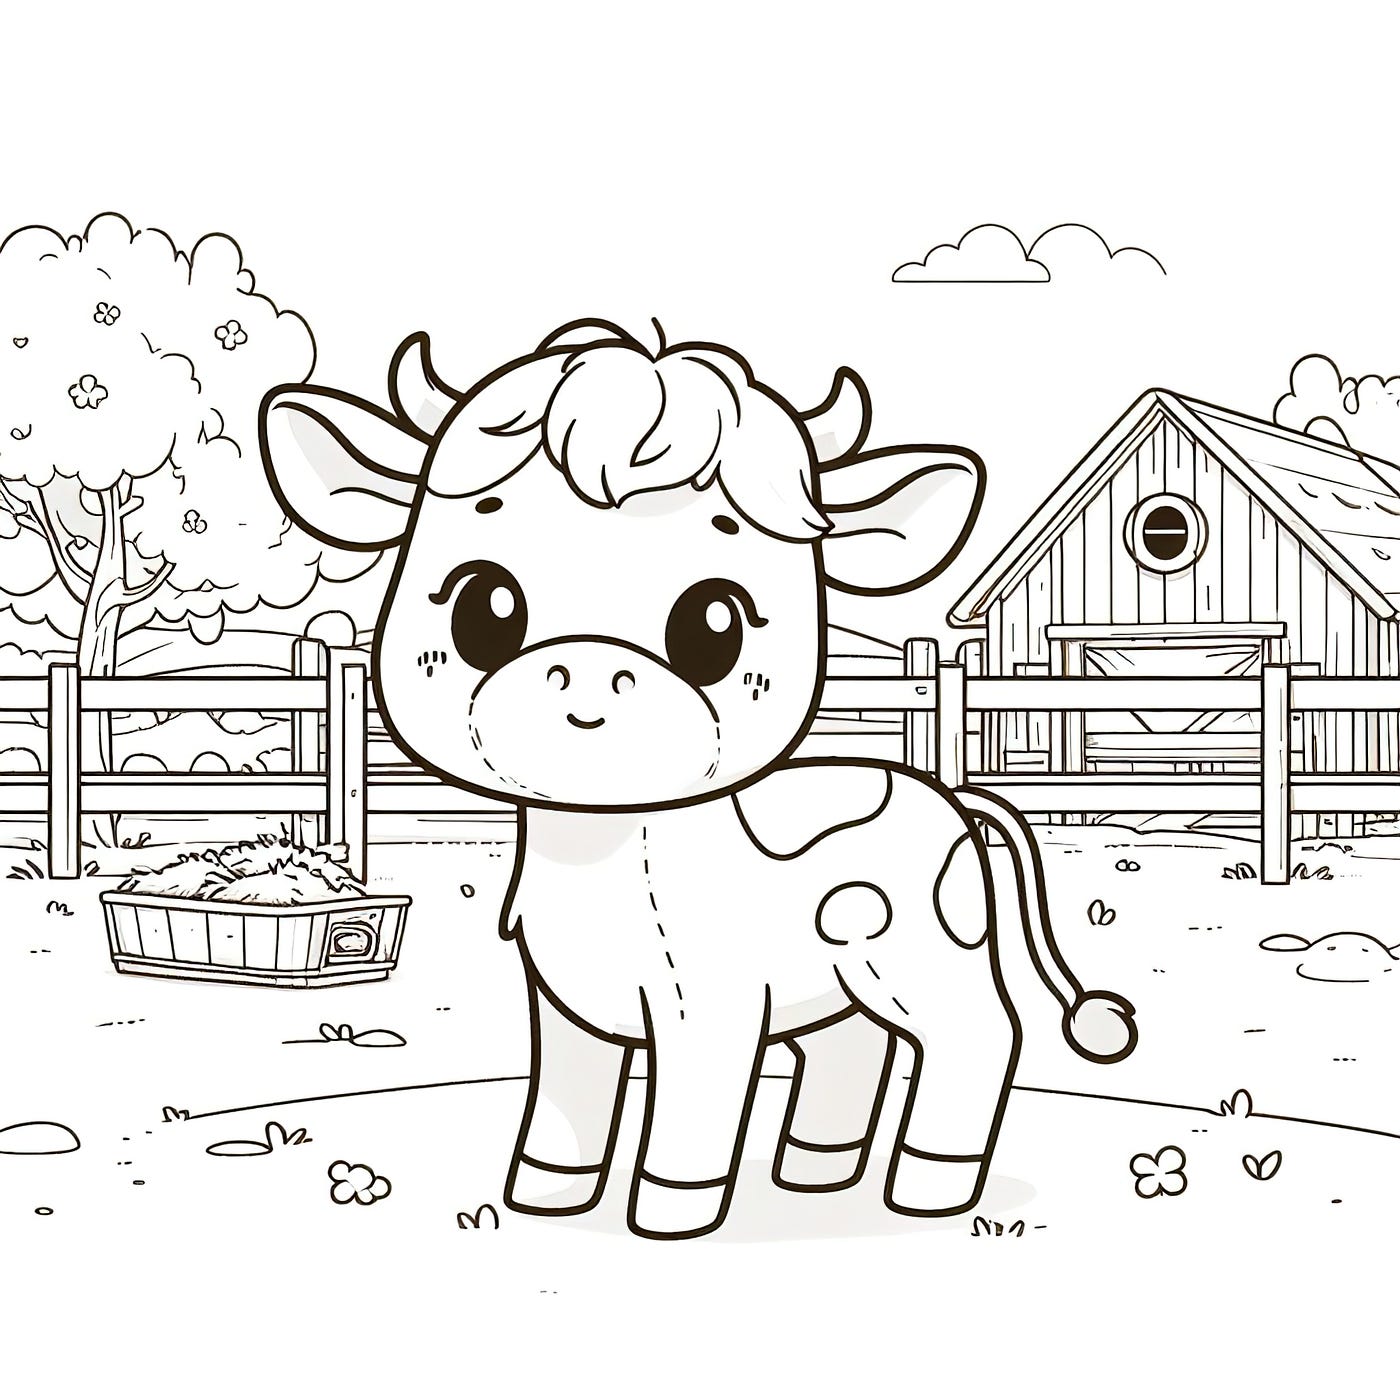 Cow Coloring Pages for Kids. Cow coloring pages for kids provide a…, by  Coloring Corner